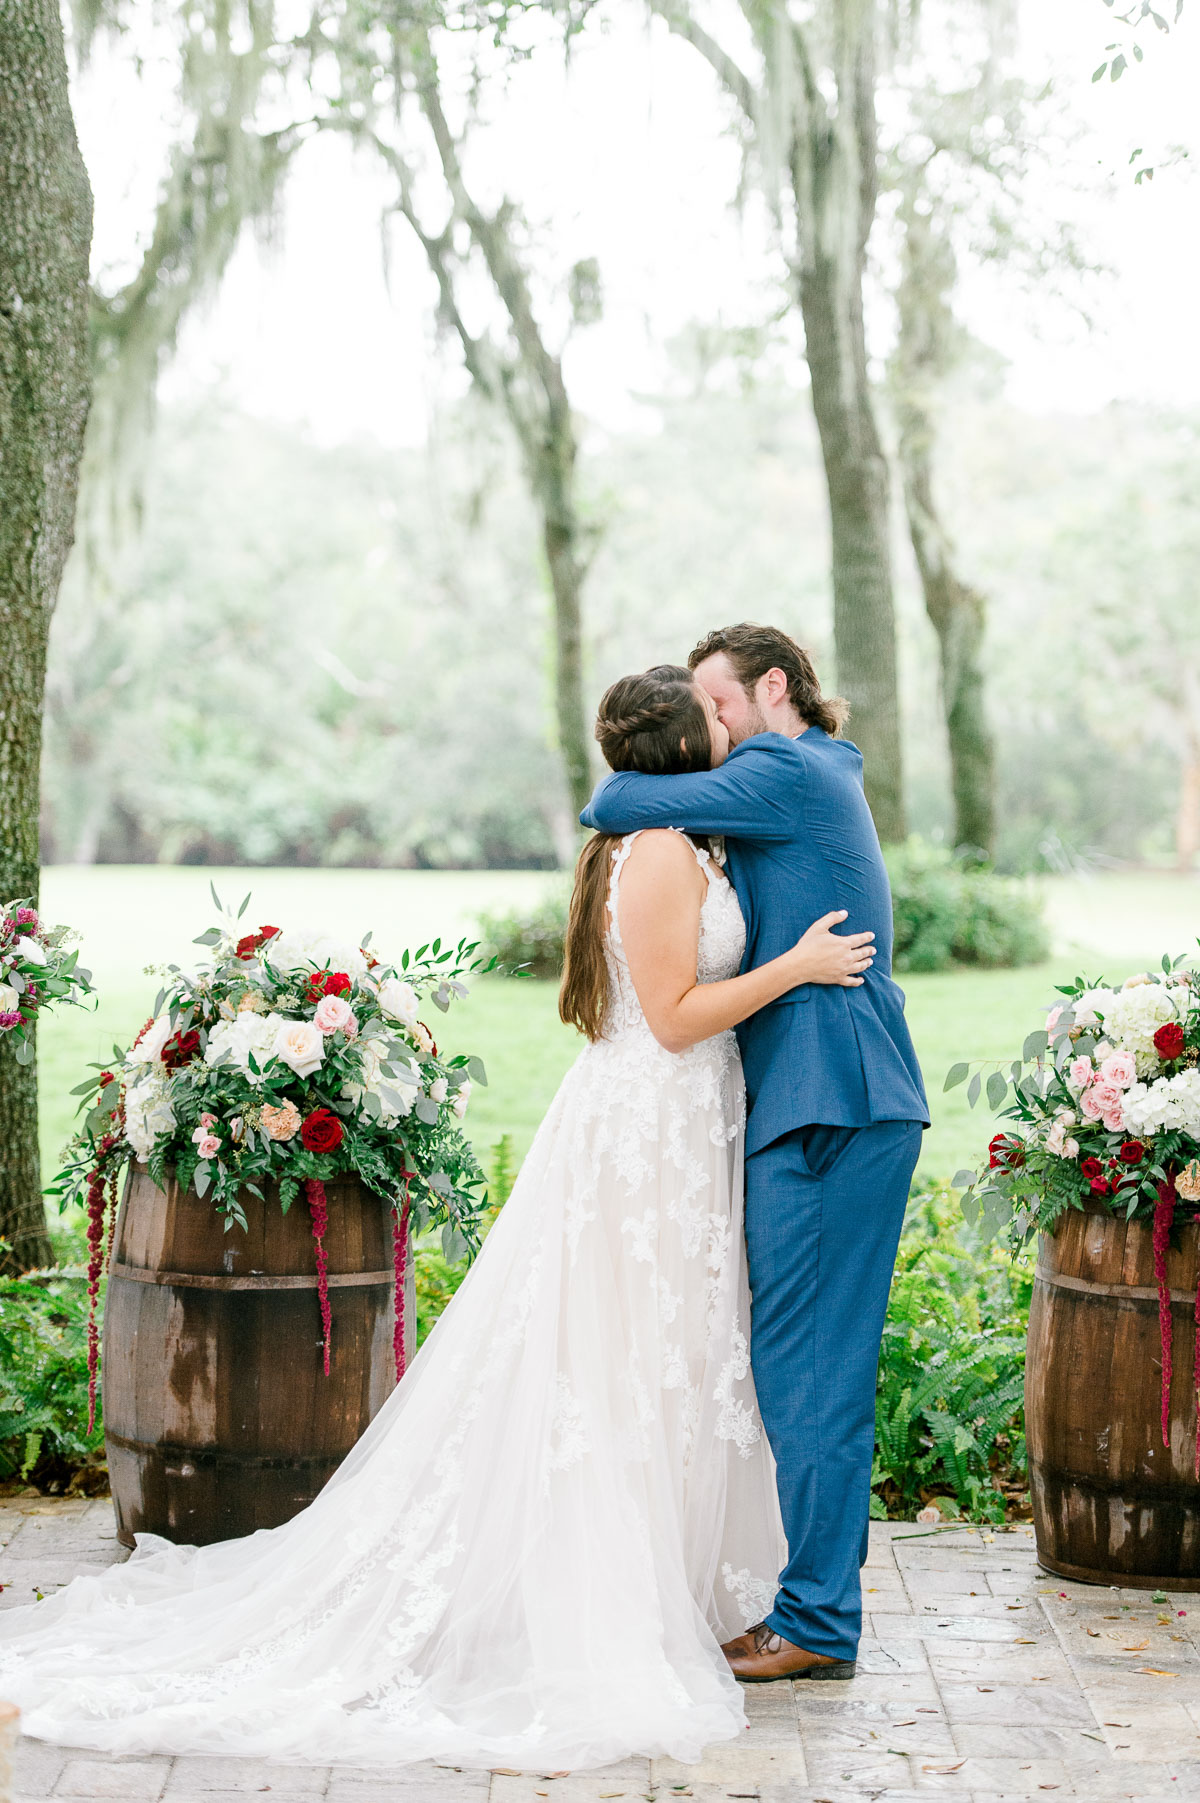 Bride and groom's first kiss at wedding ceremony